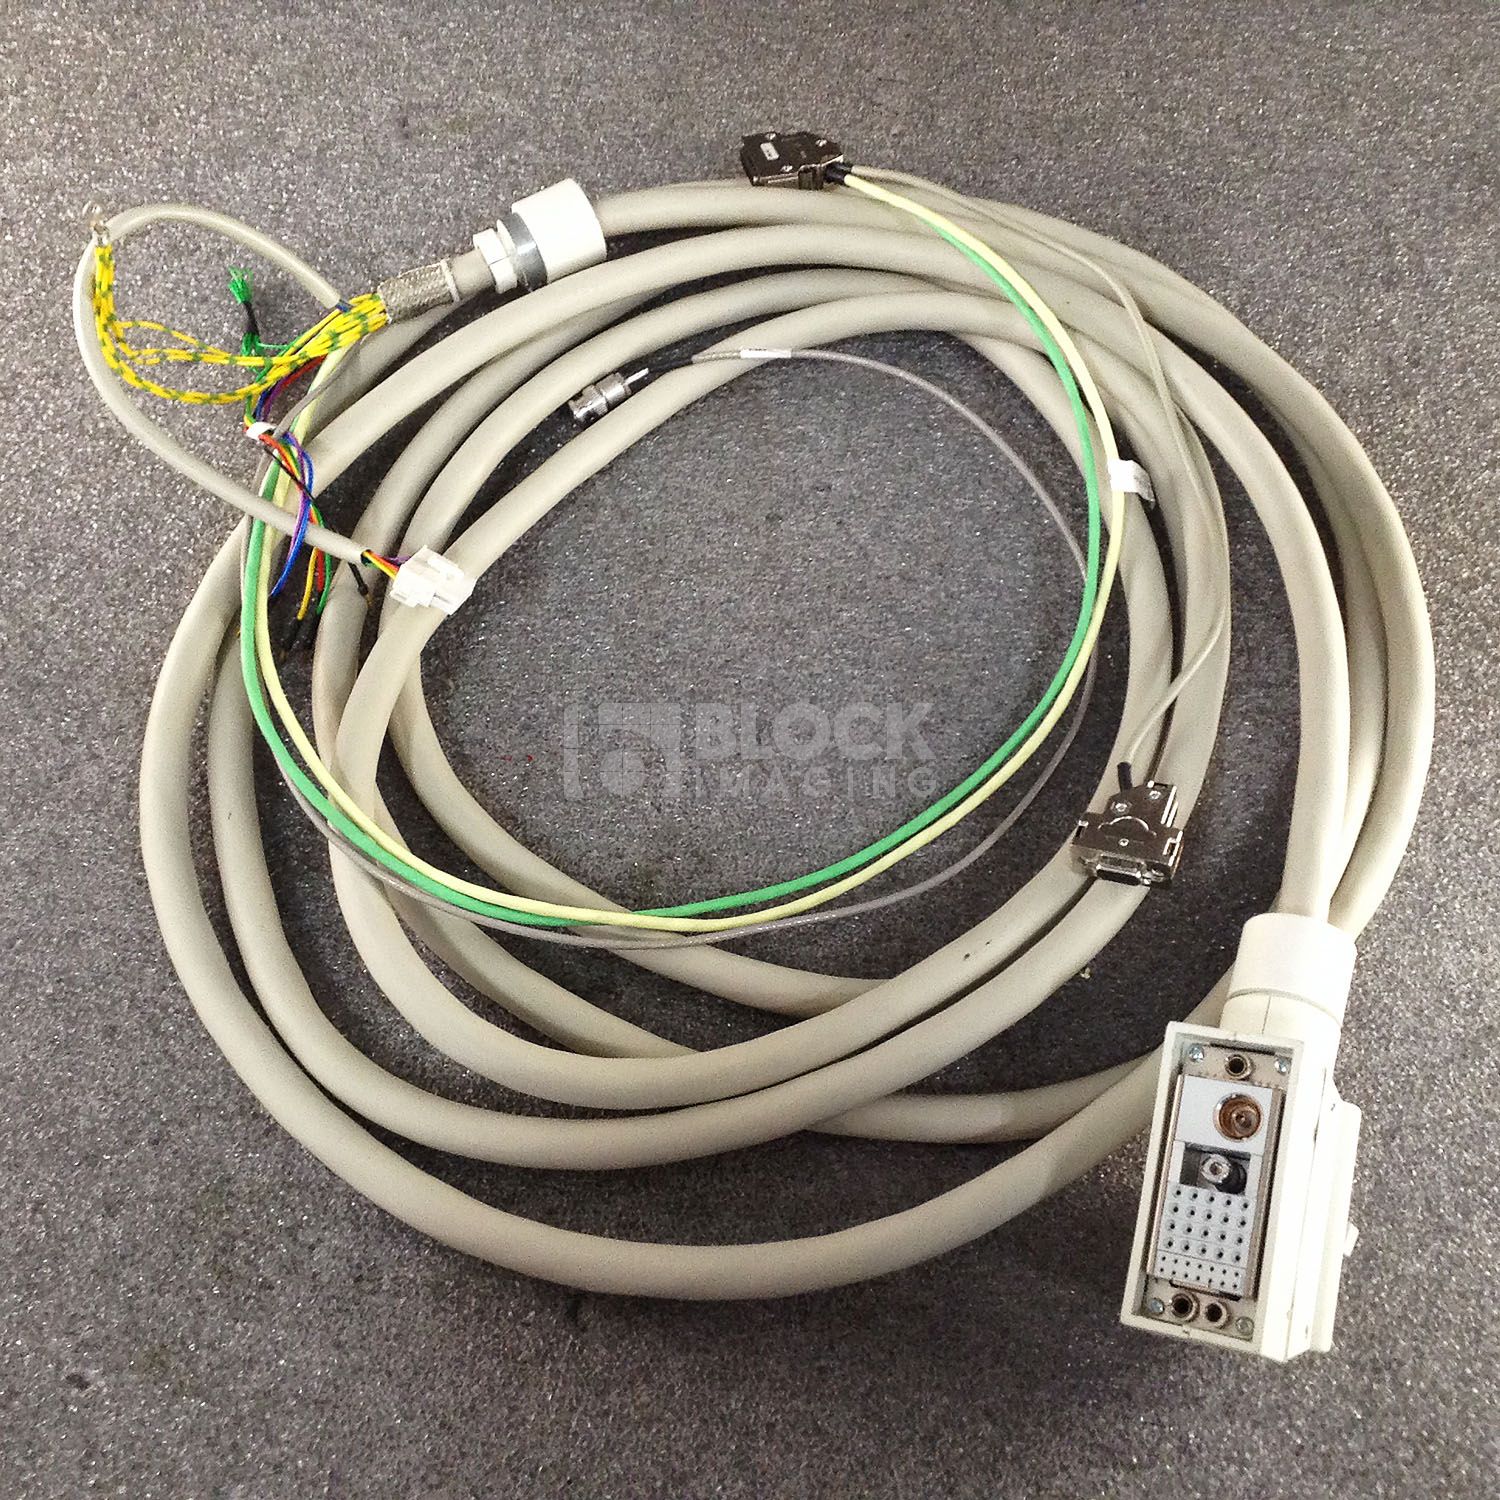 7718211 CO6/C07 SG Cable for Siemens C-arm | Block Imaging